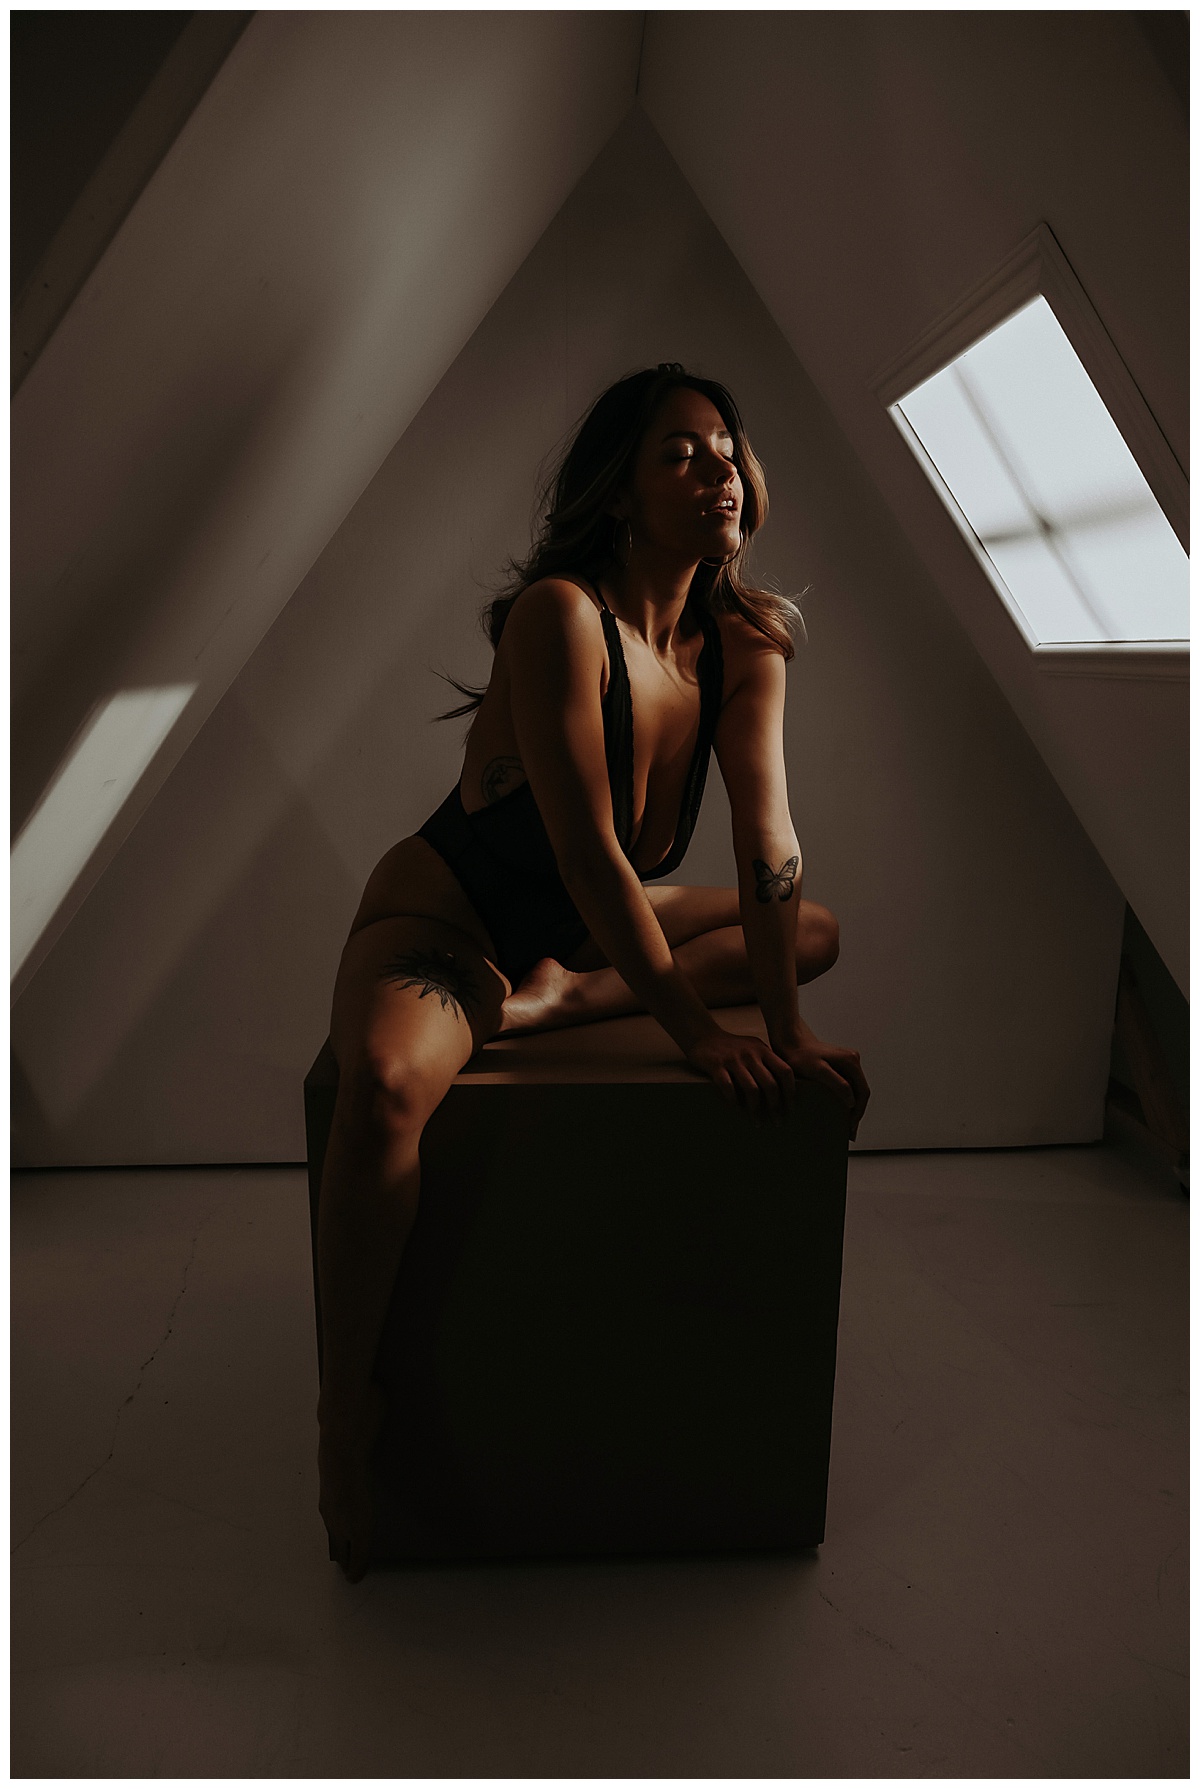 Girl sits in light on box for Mary Castillo Photography